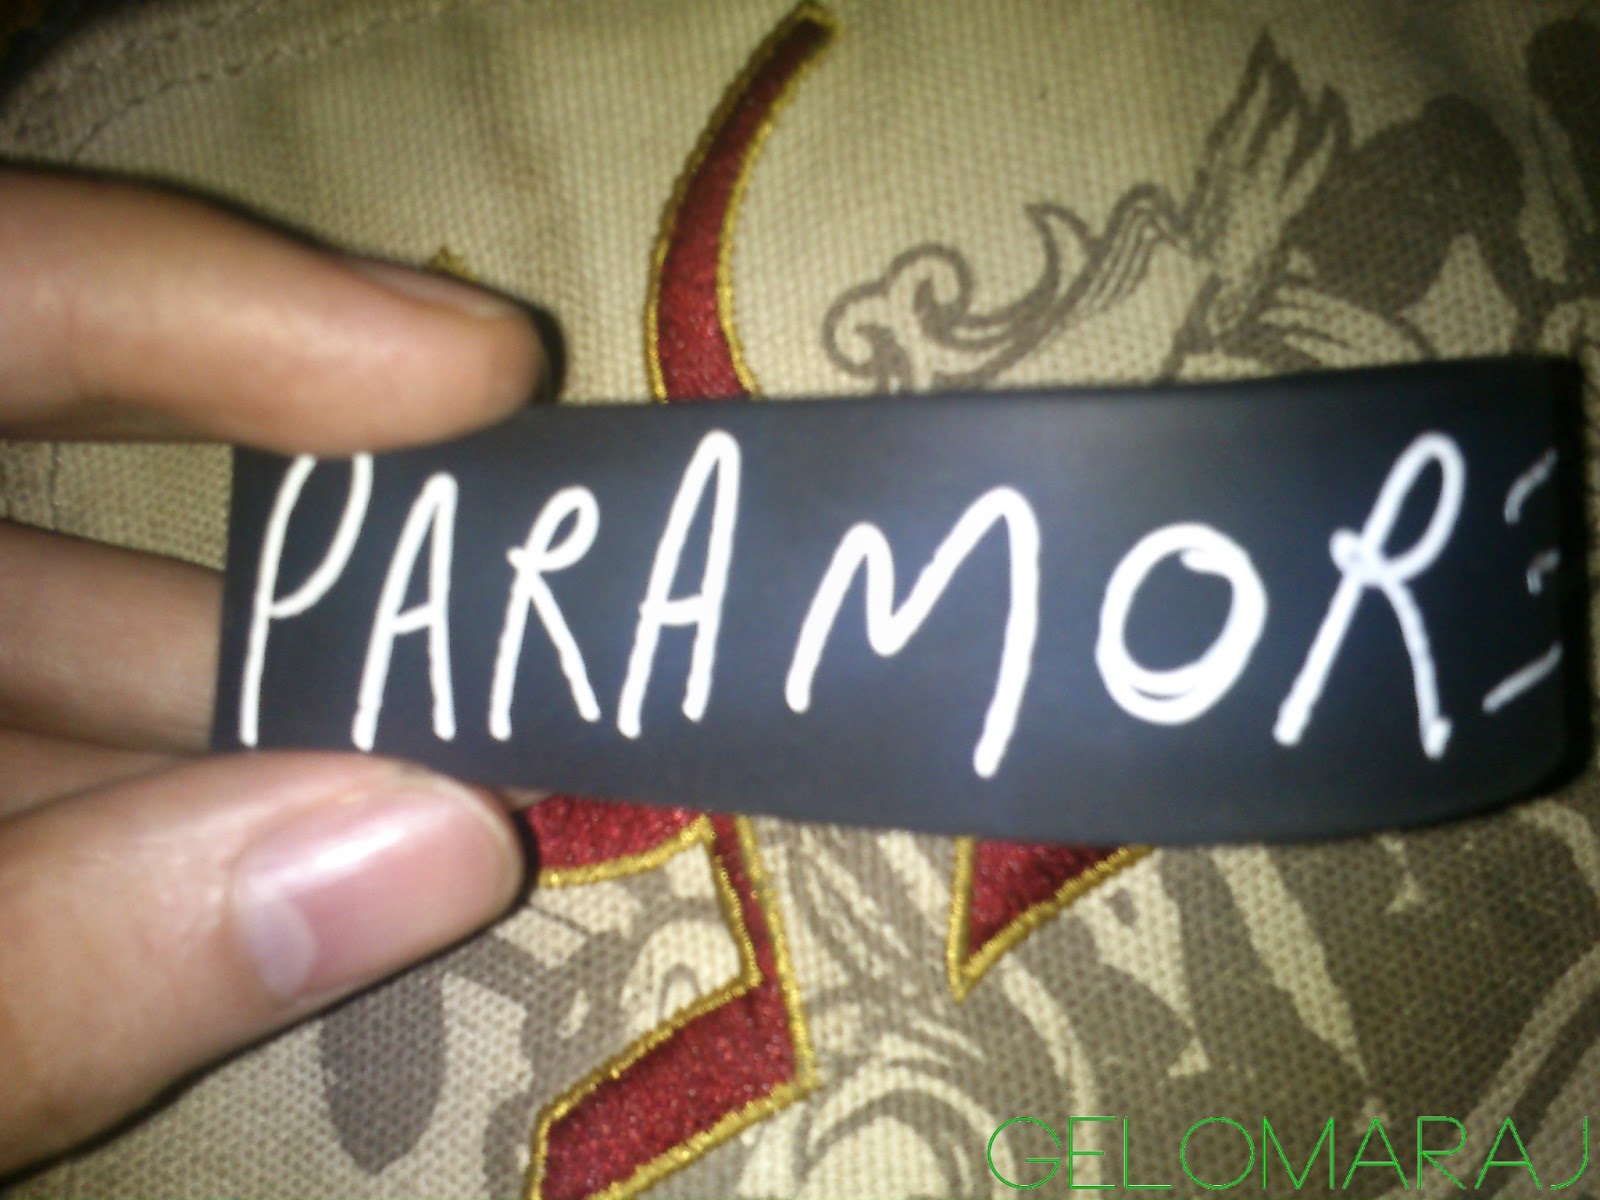 Filipino Fanboy: Parathrilla 2013: The Paramore Album Buyout & Paramore Self Titled ...1600 x 1200